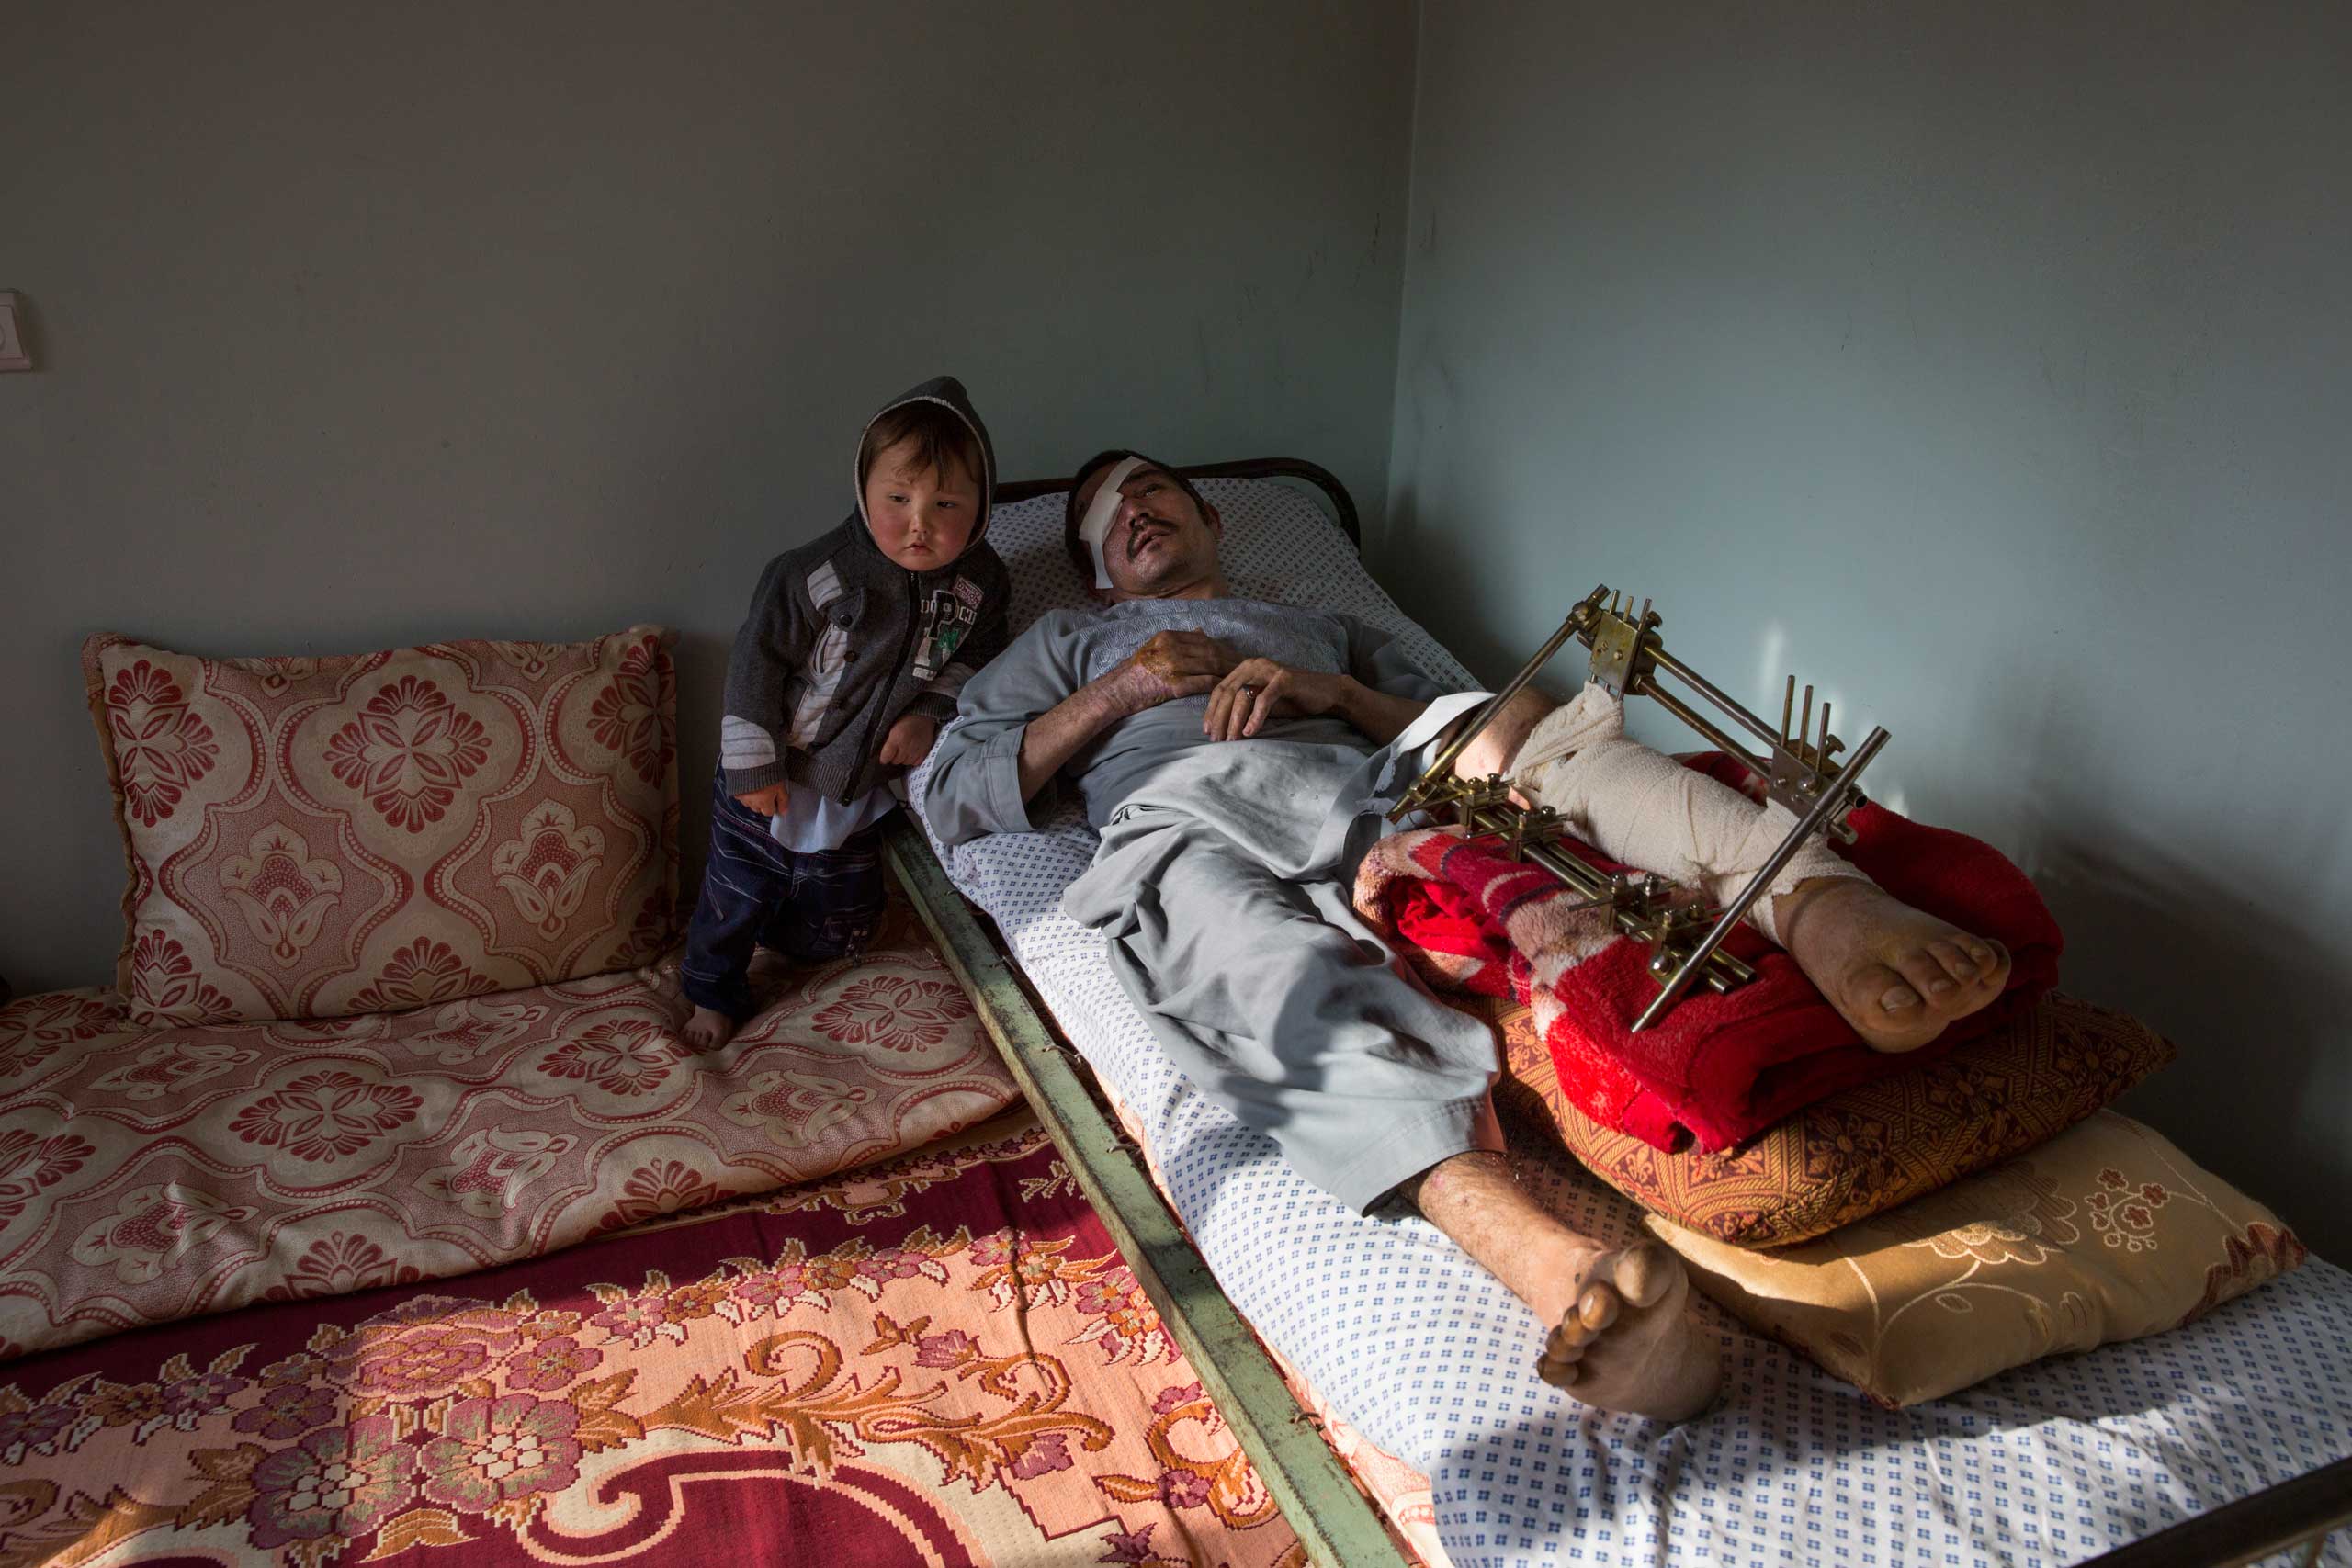 Abdul Hussain Ayoobi, is seen at home with his son Ali Akbar, 3. Abdul, a carpenter was one of the seriously wounded victims for Tolo TV. The employees had finished a day’s work at Tolo TV, one of Afghanistan’s largest entertainment channels, when they boarded a company bus in Kabul on April 9, 206. It was rammed by a car driven by a Taliban suicide bomber. Seven people were killed and at least 25 wounded in the attack.